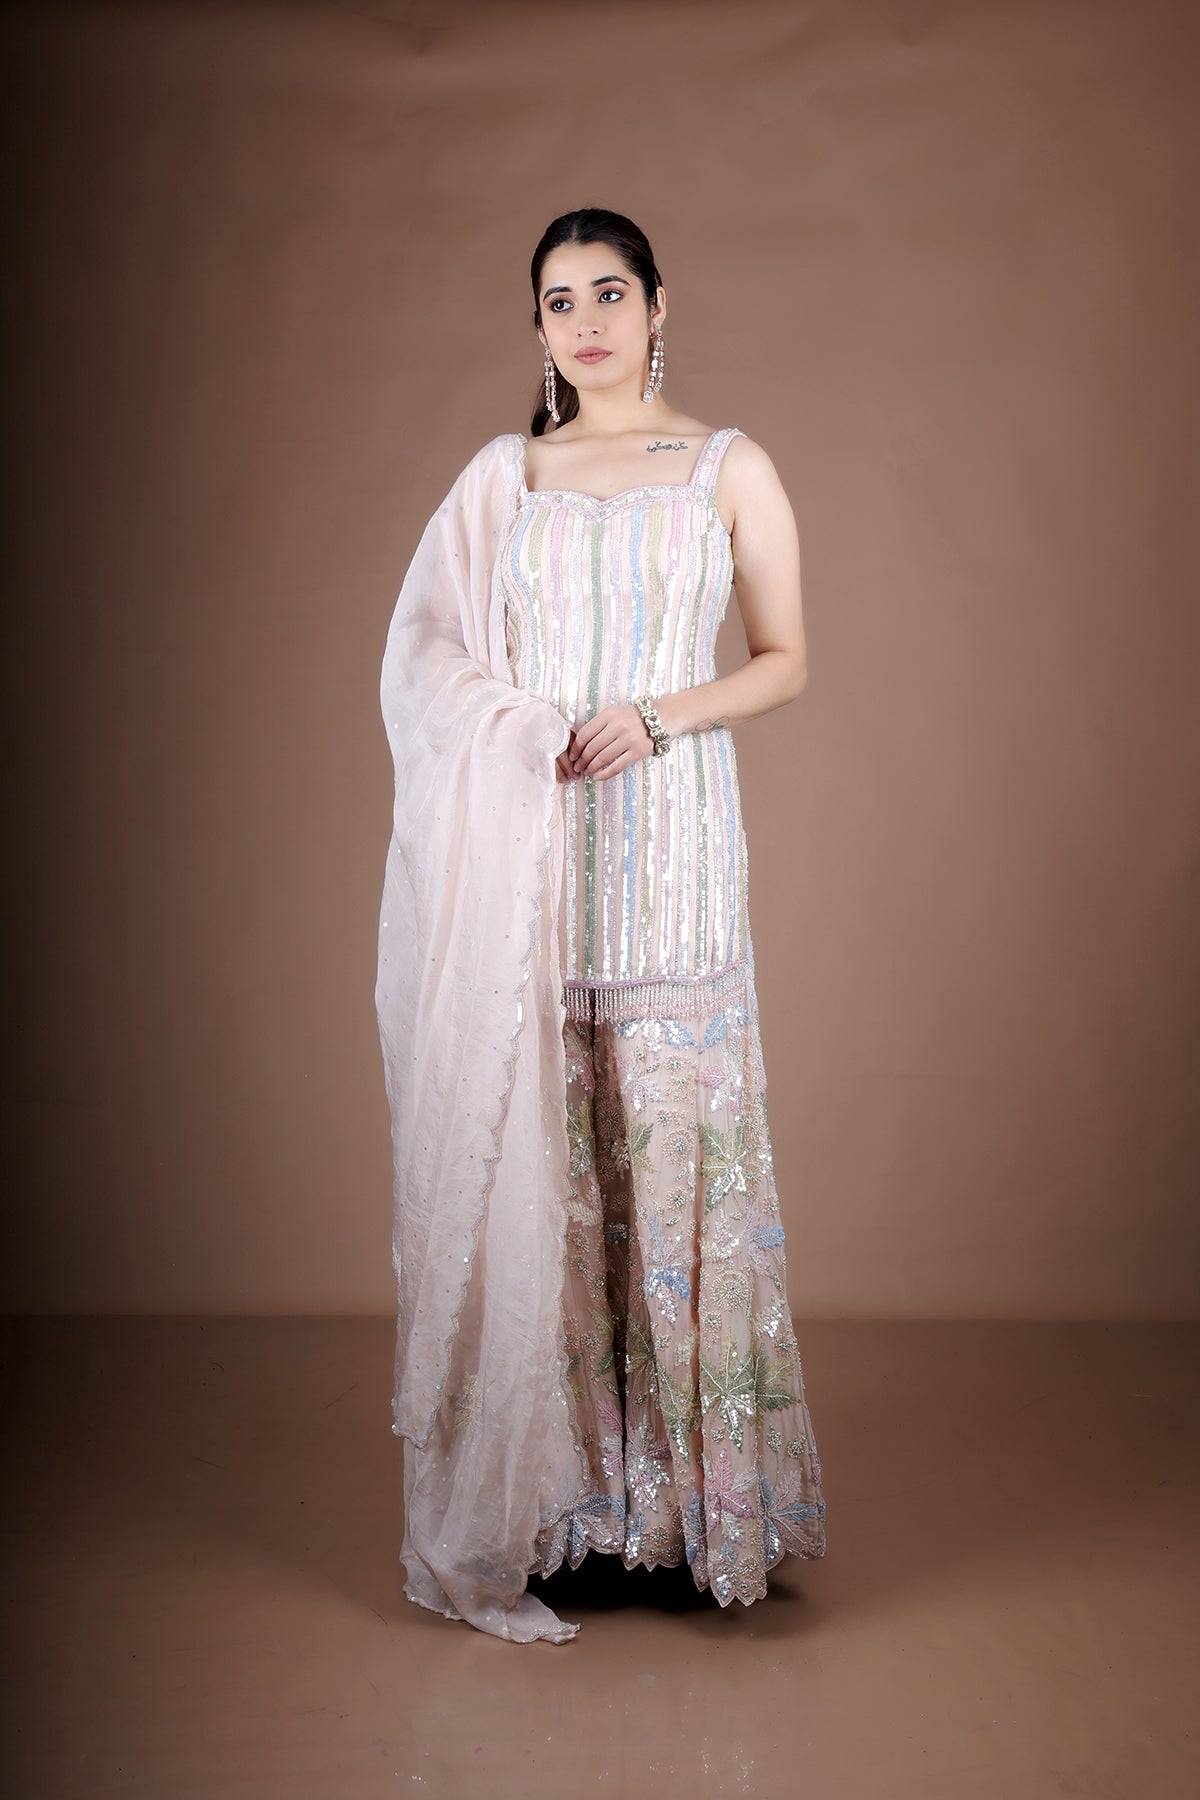 Pink Sharara suit adorned with hand embroidery